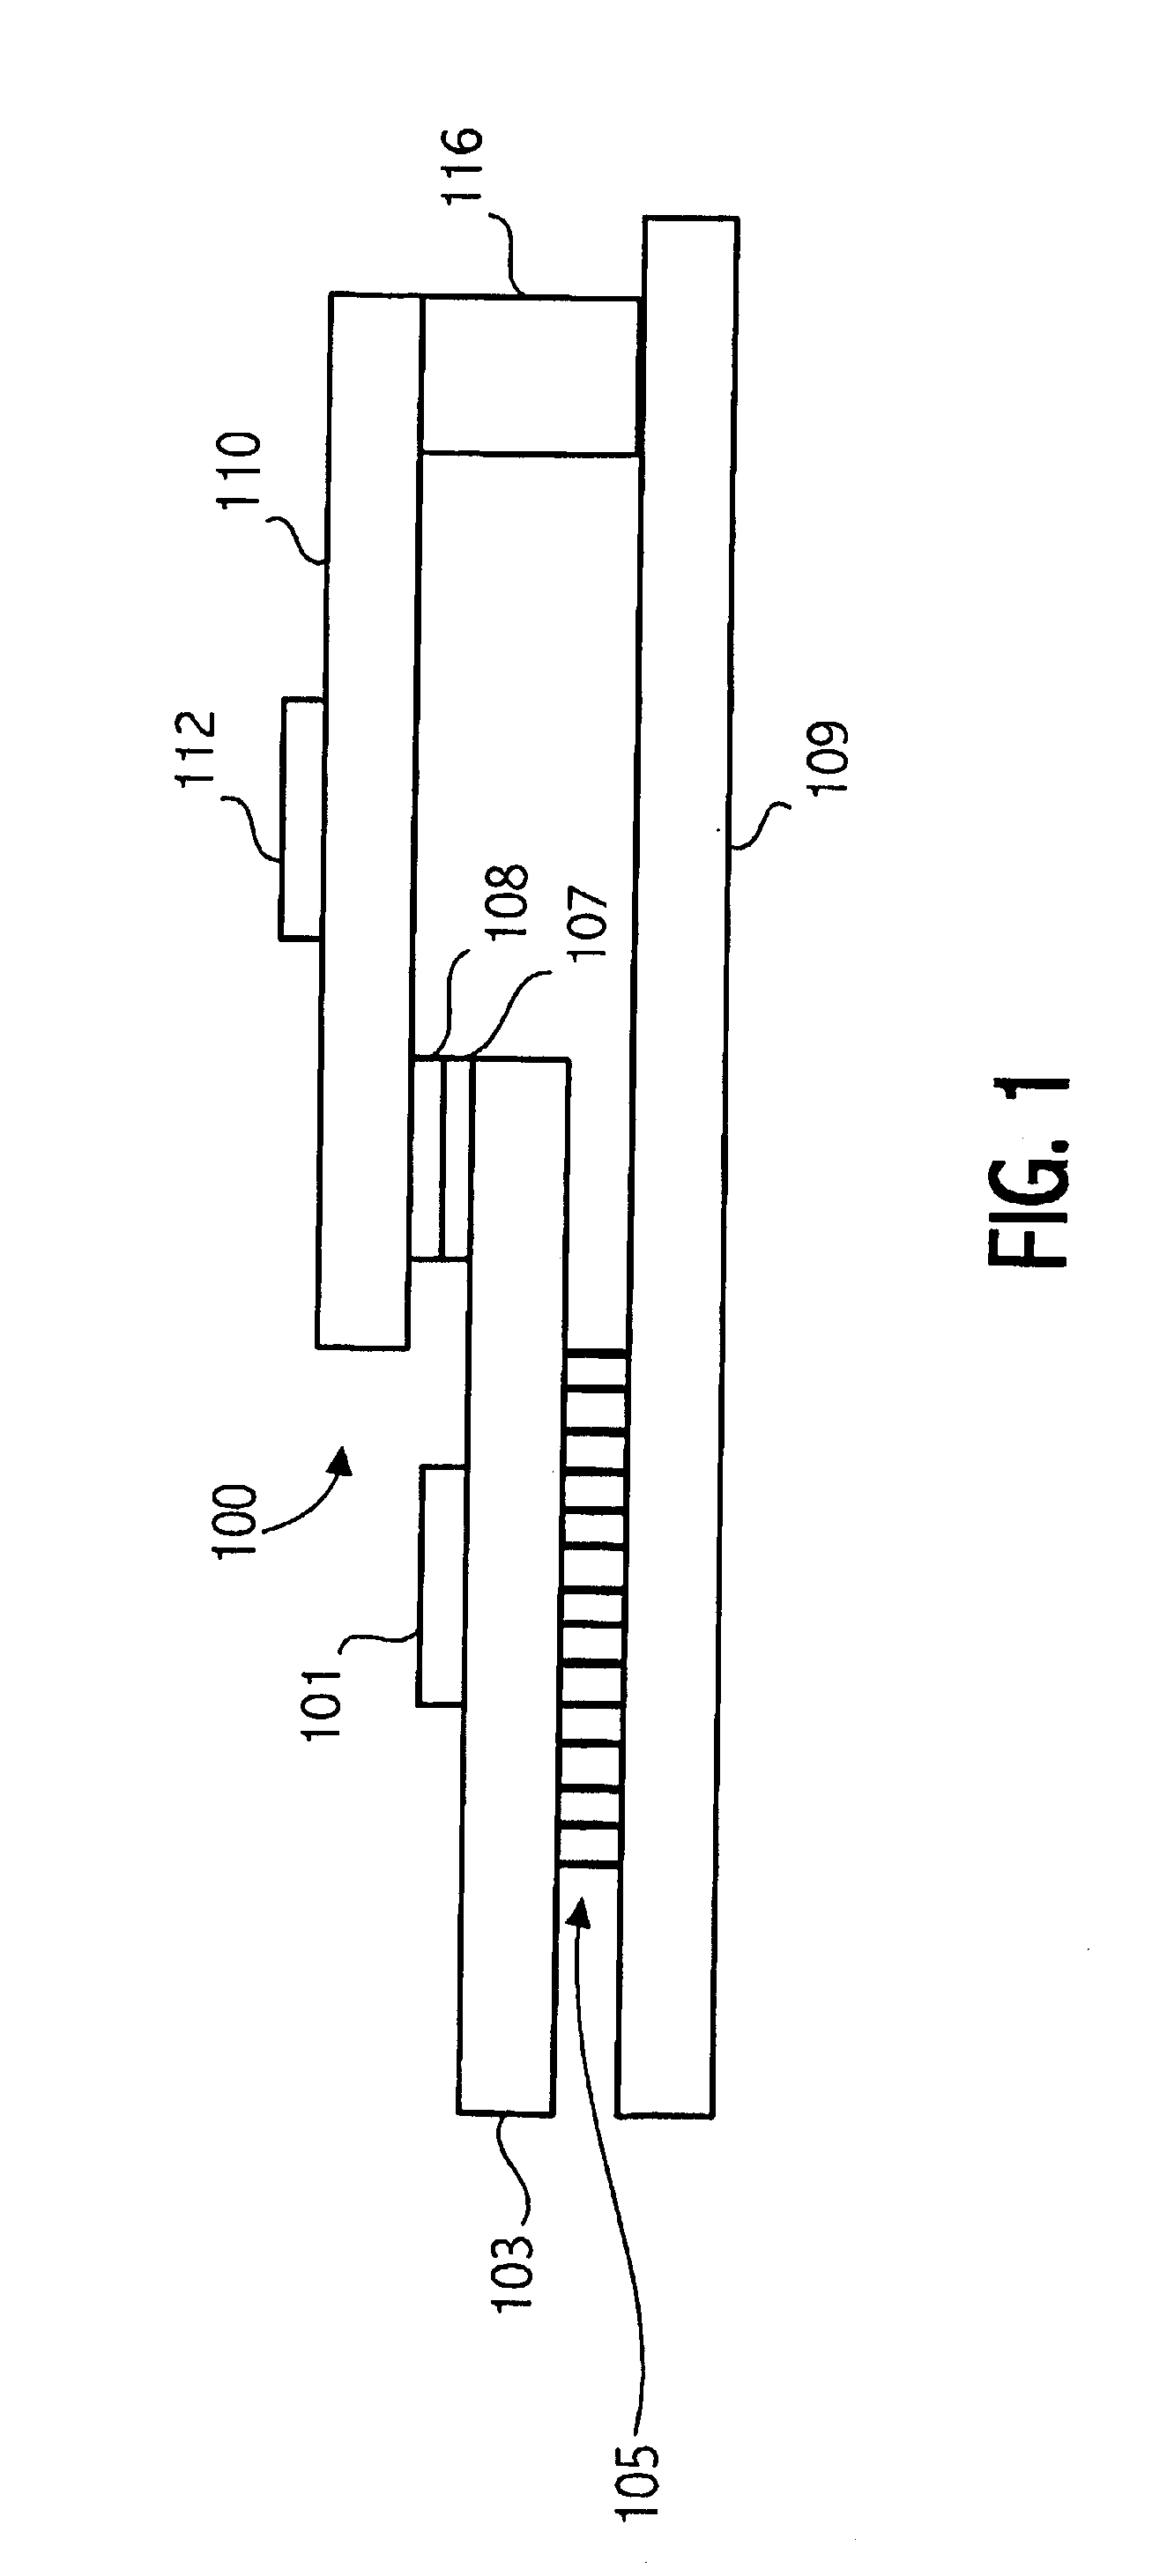 Method and apparatus for direct connection between two integrated circuits via a connector